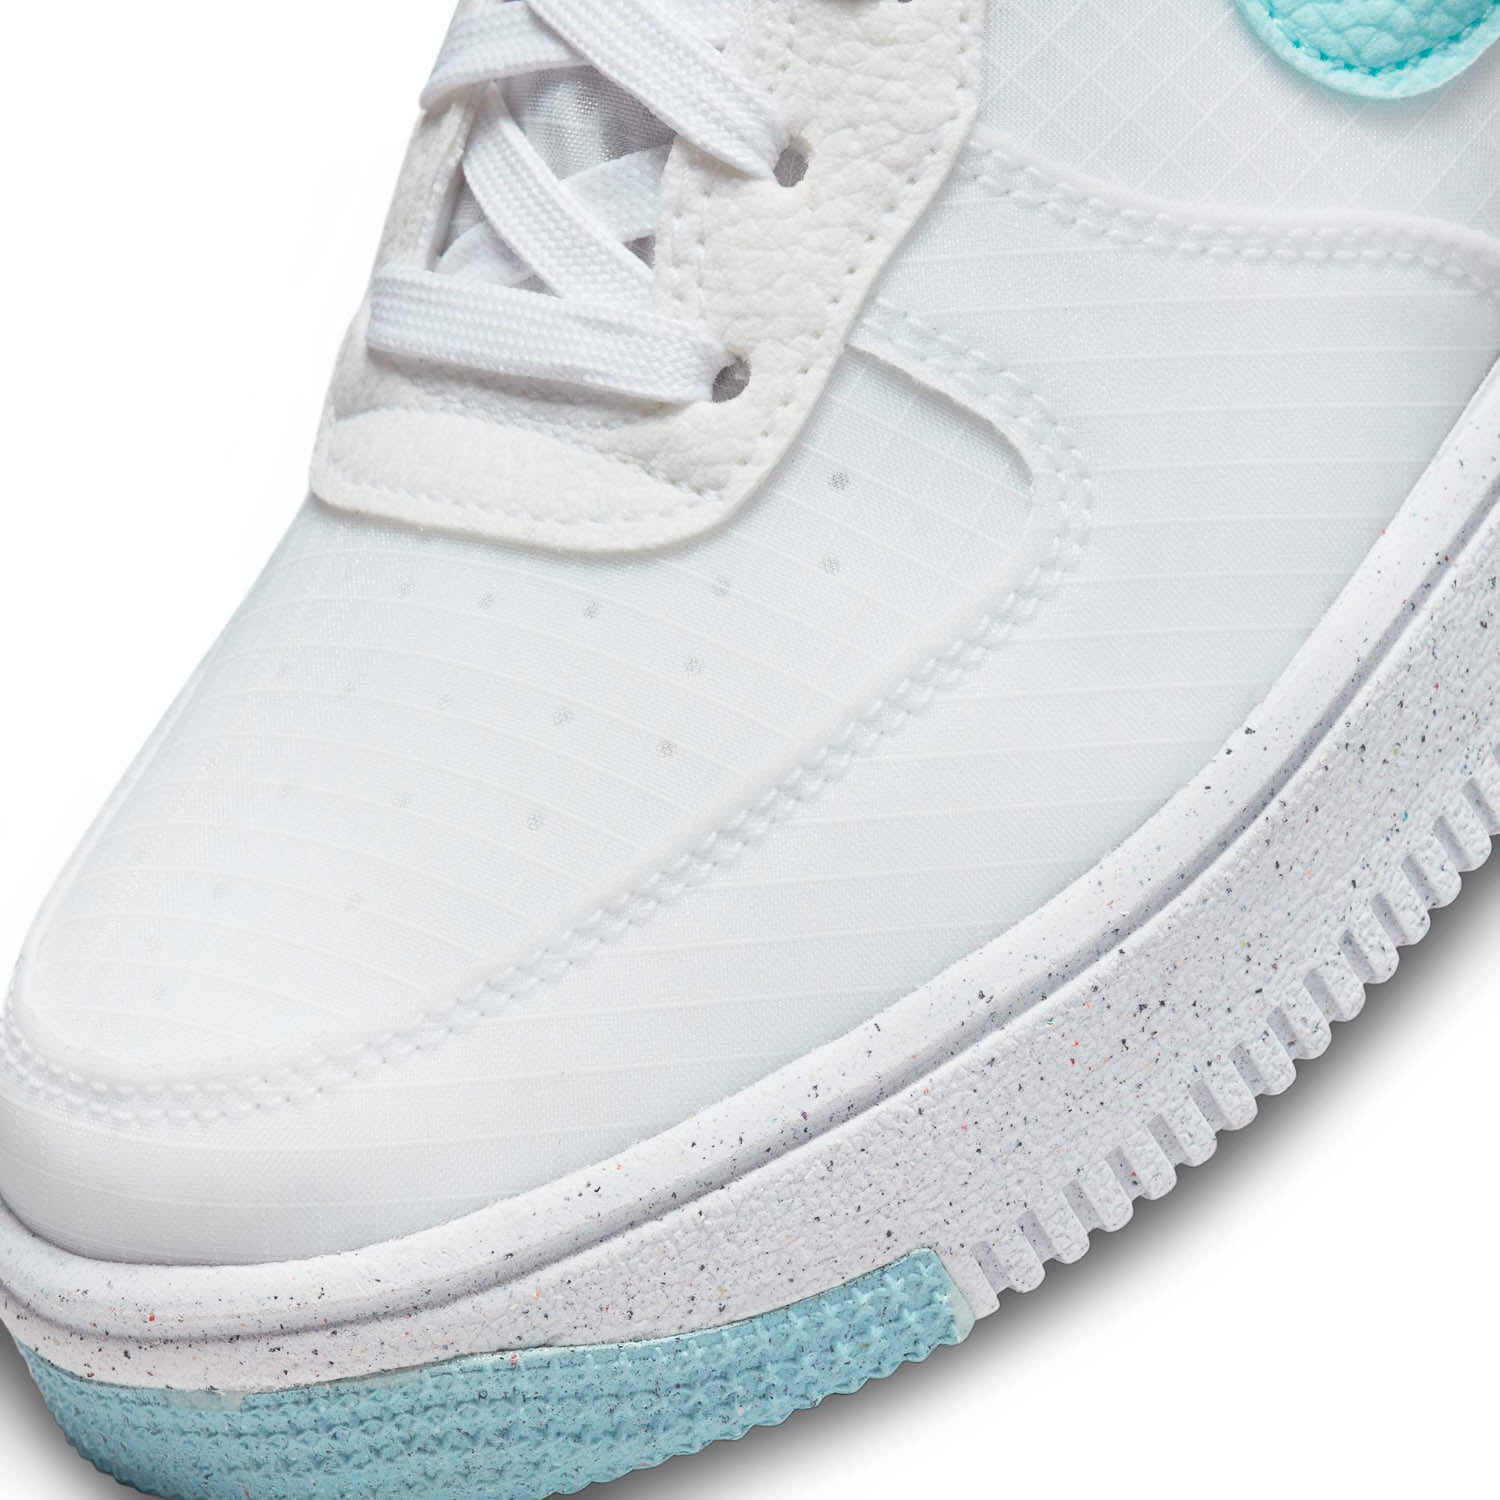 Nike Air Force 1 Crater, Sneakers Femme, Nike